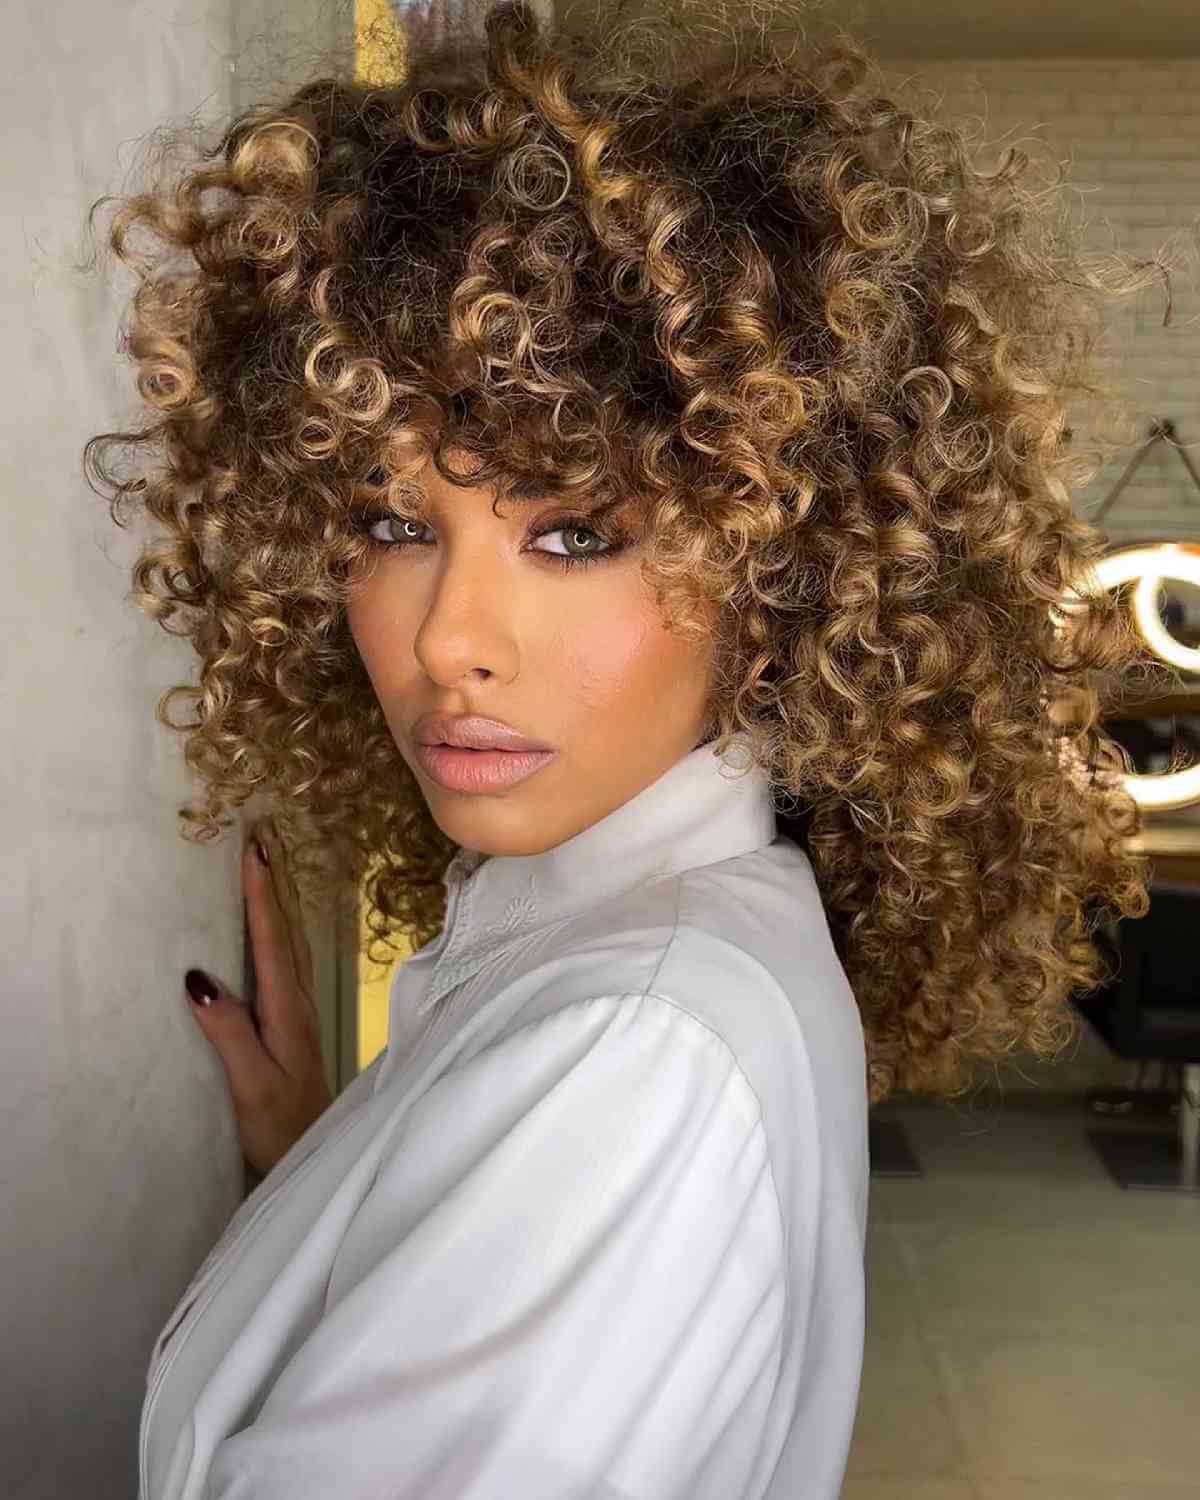 Full-Looking Brown Curly Hair with Golden Highlights